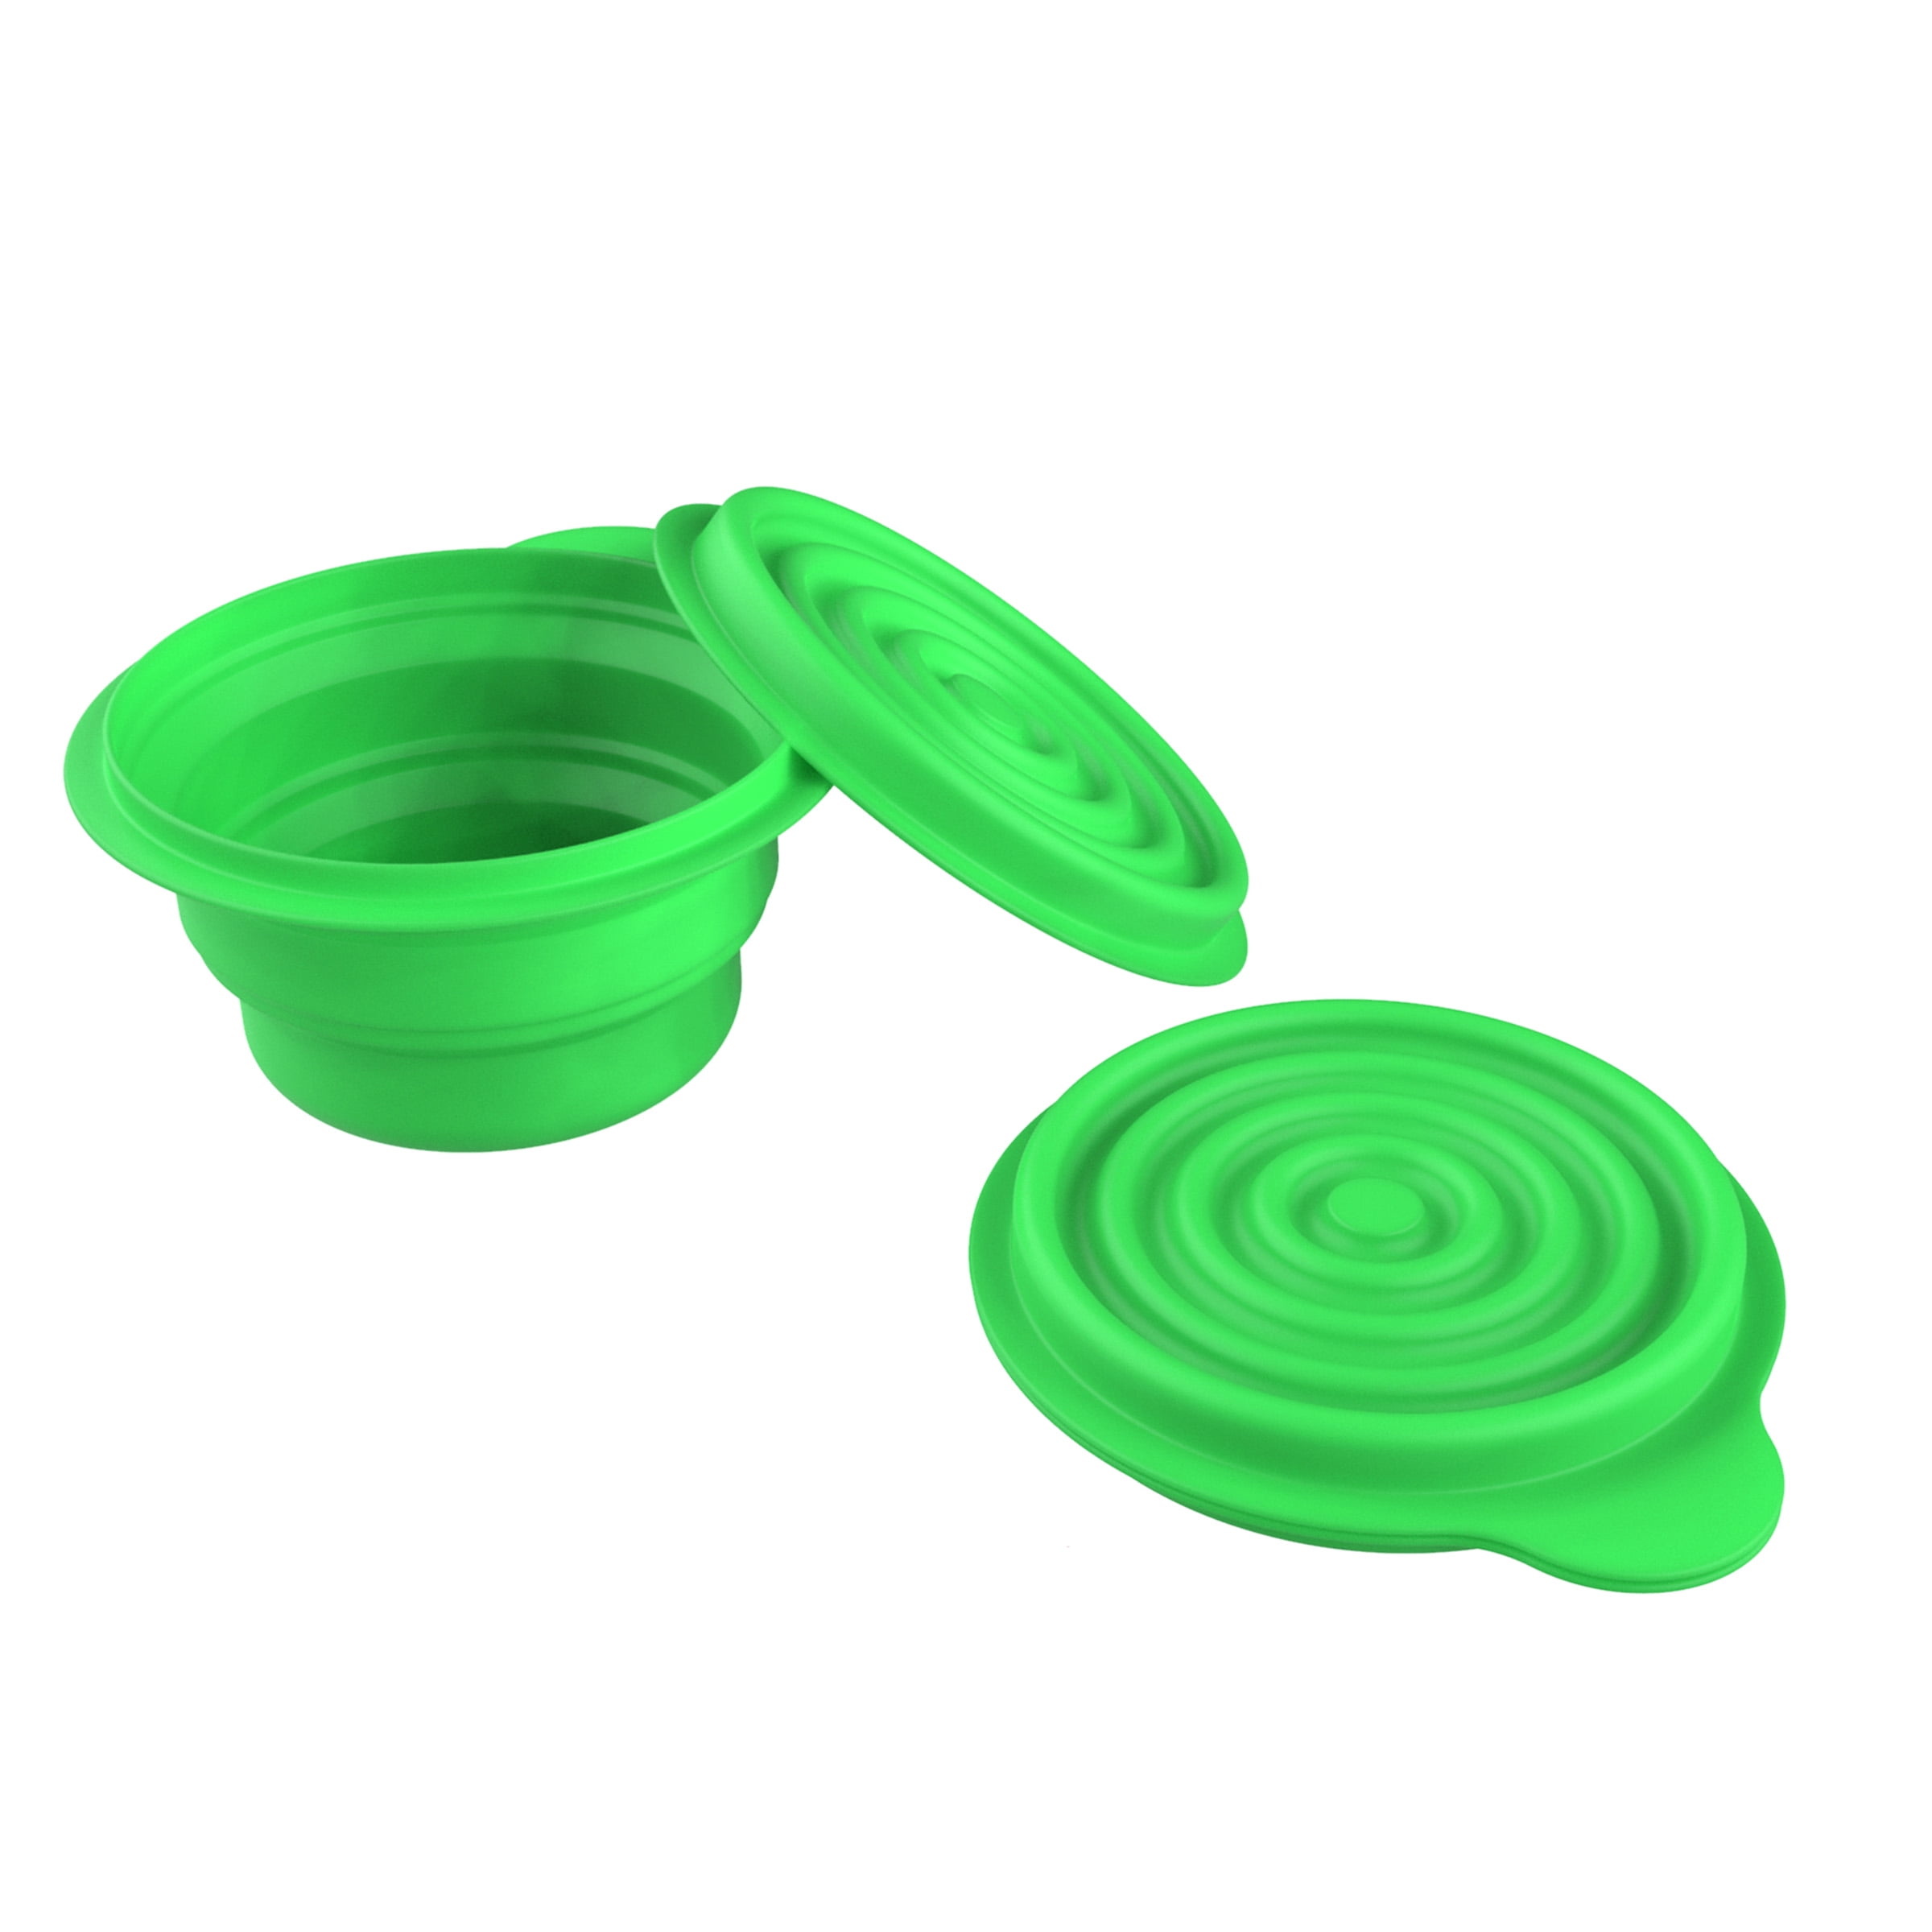 Collapsible Bowls with Lids- BPA Free Silicone, Reusable Hot or